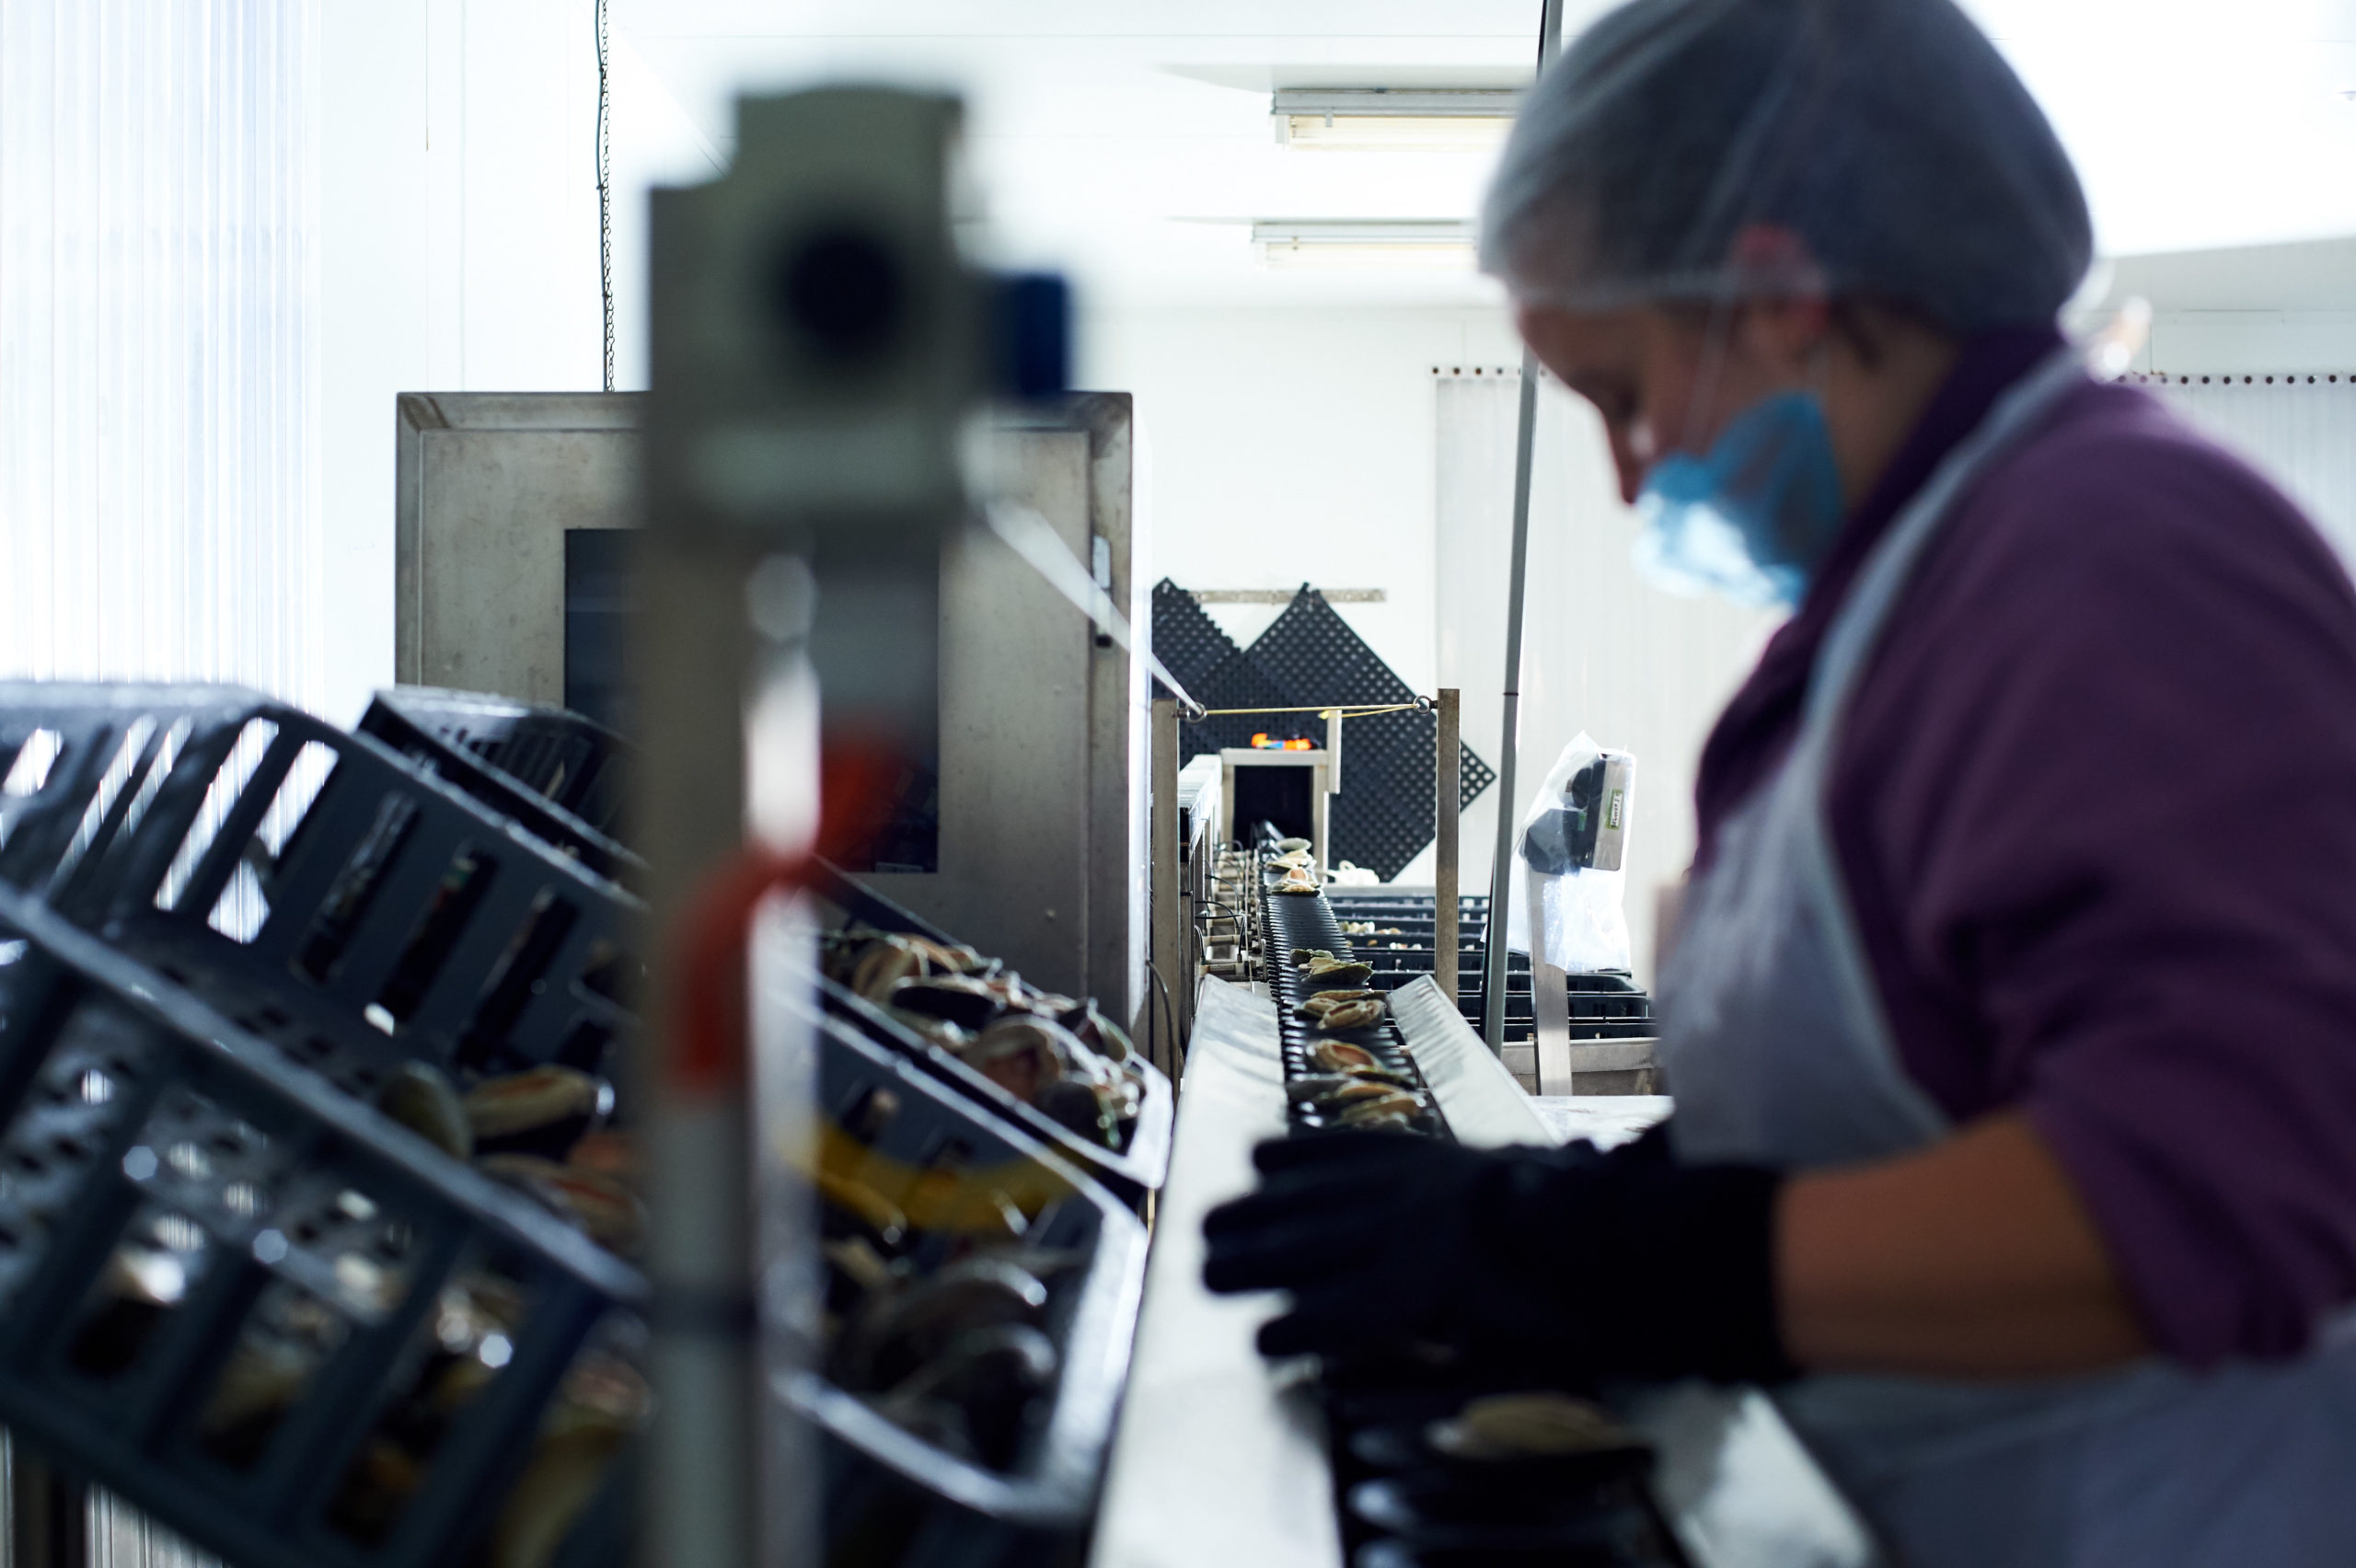 Abalone travel down a conveyer belt at a processing facility, carefully inspected by a team member.